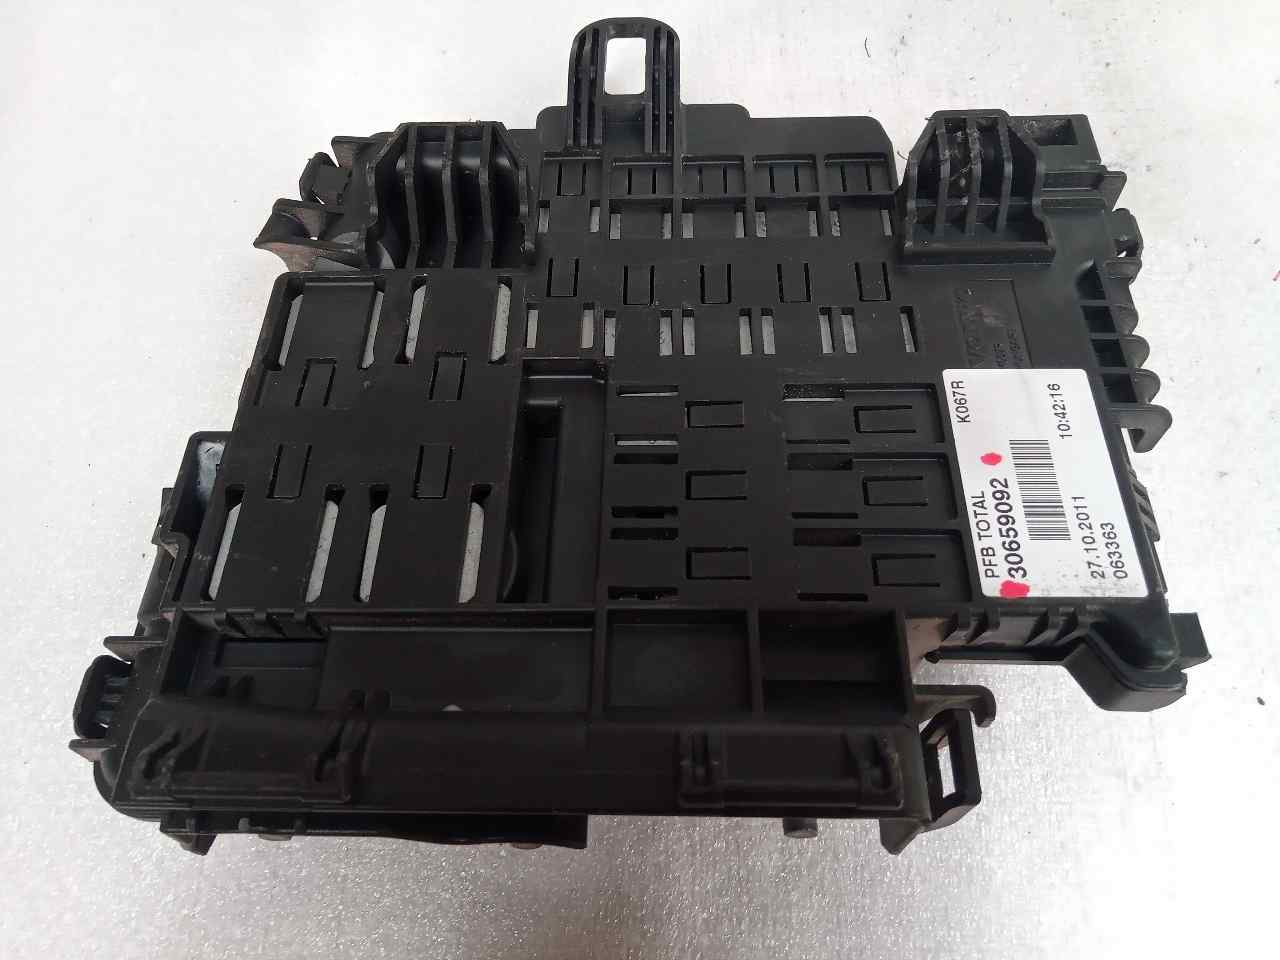 VOLVO XC70 3 generation (2007-2020) Other Control Units 30659092 23814904